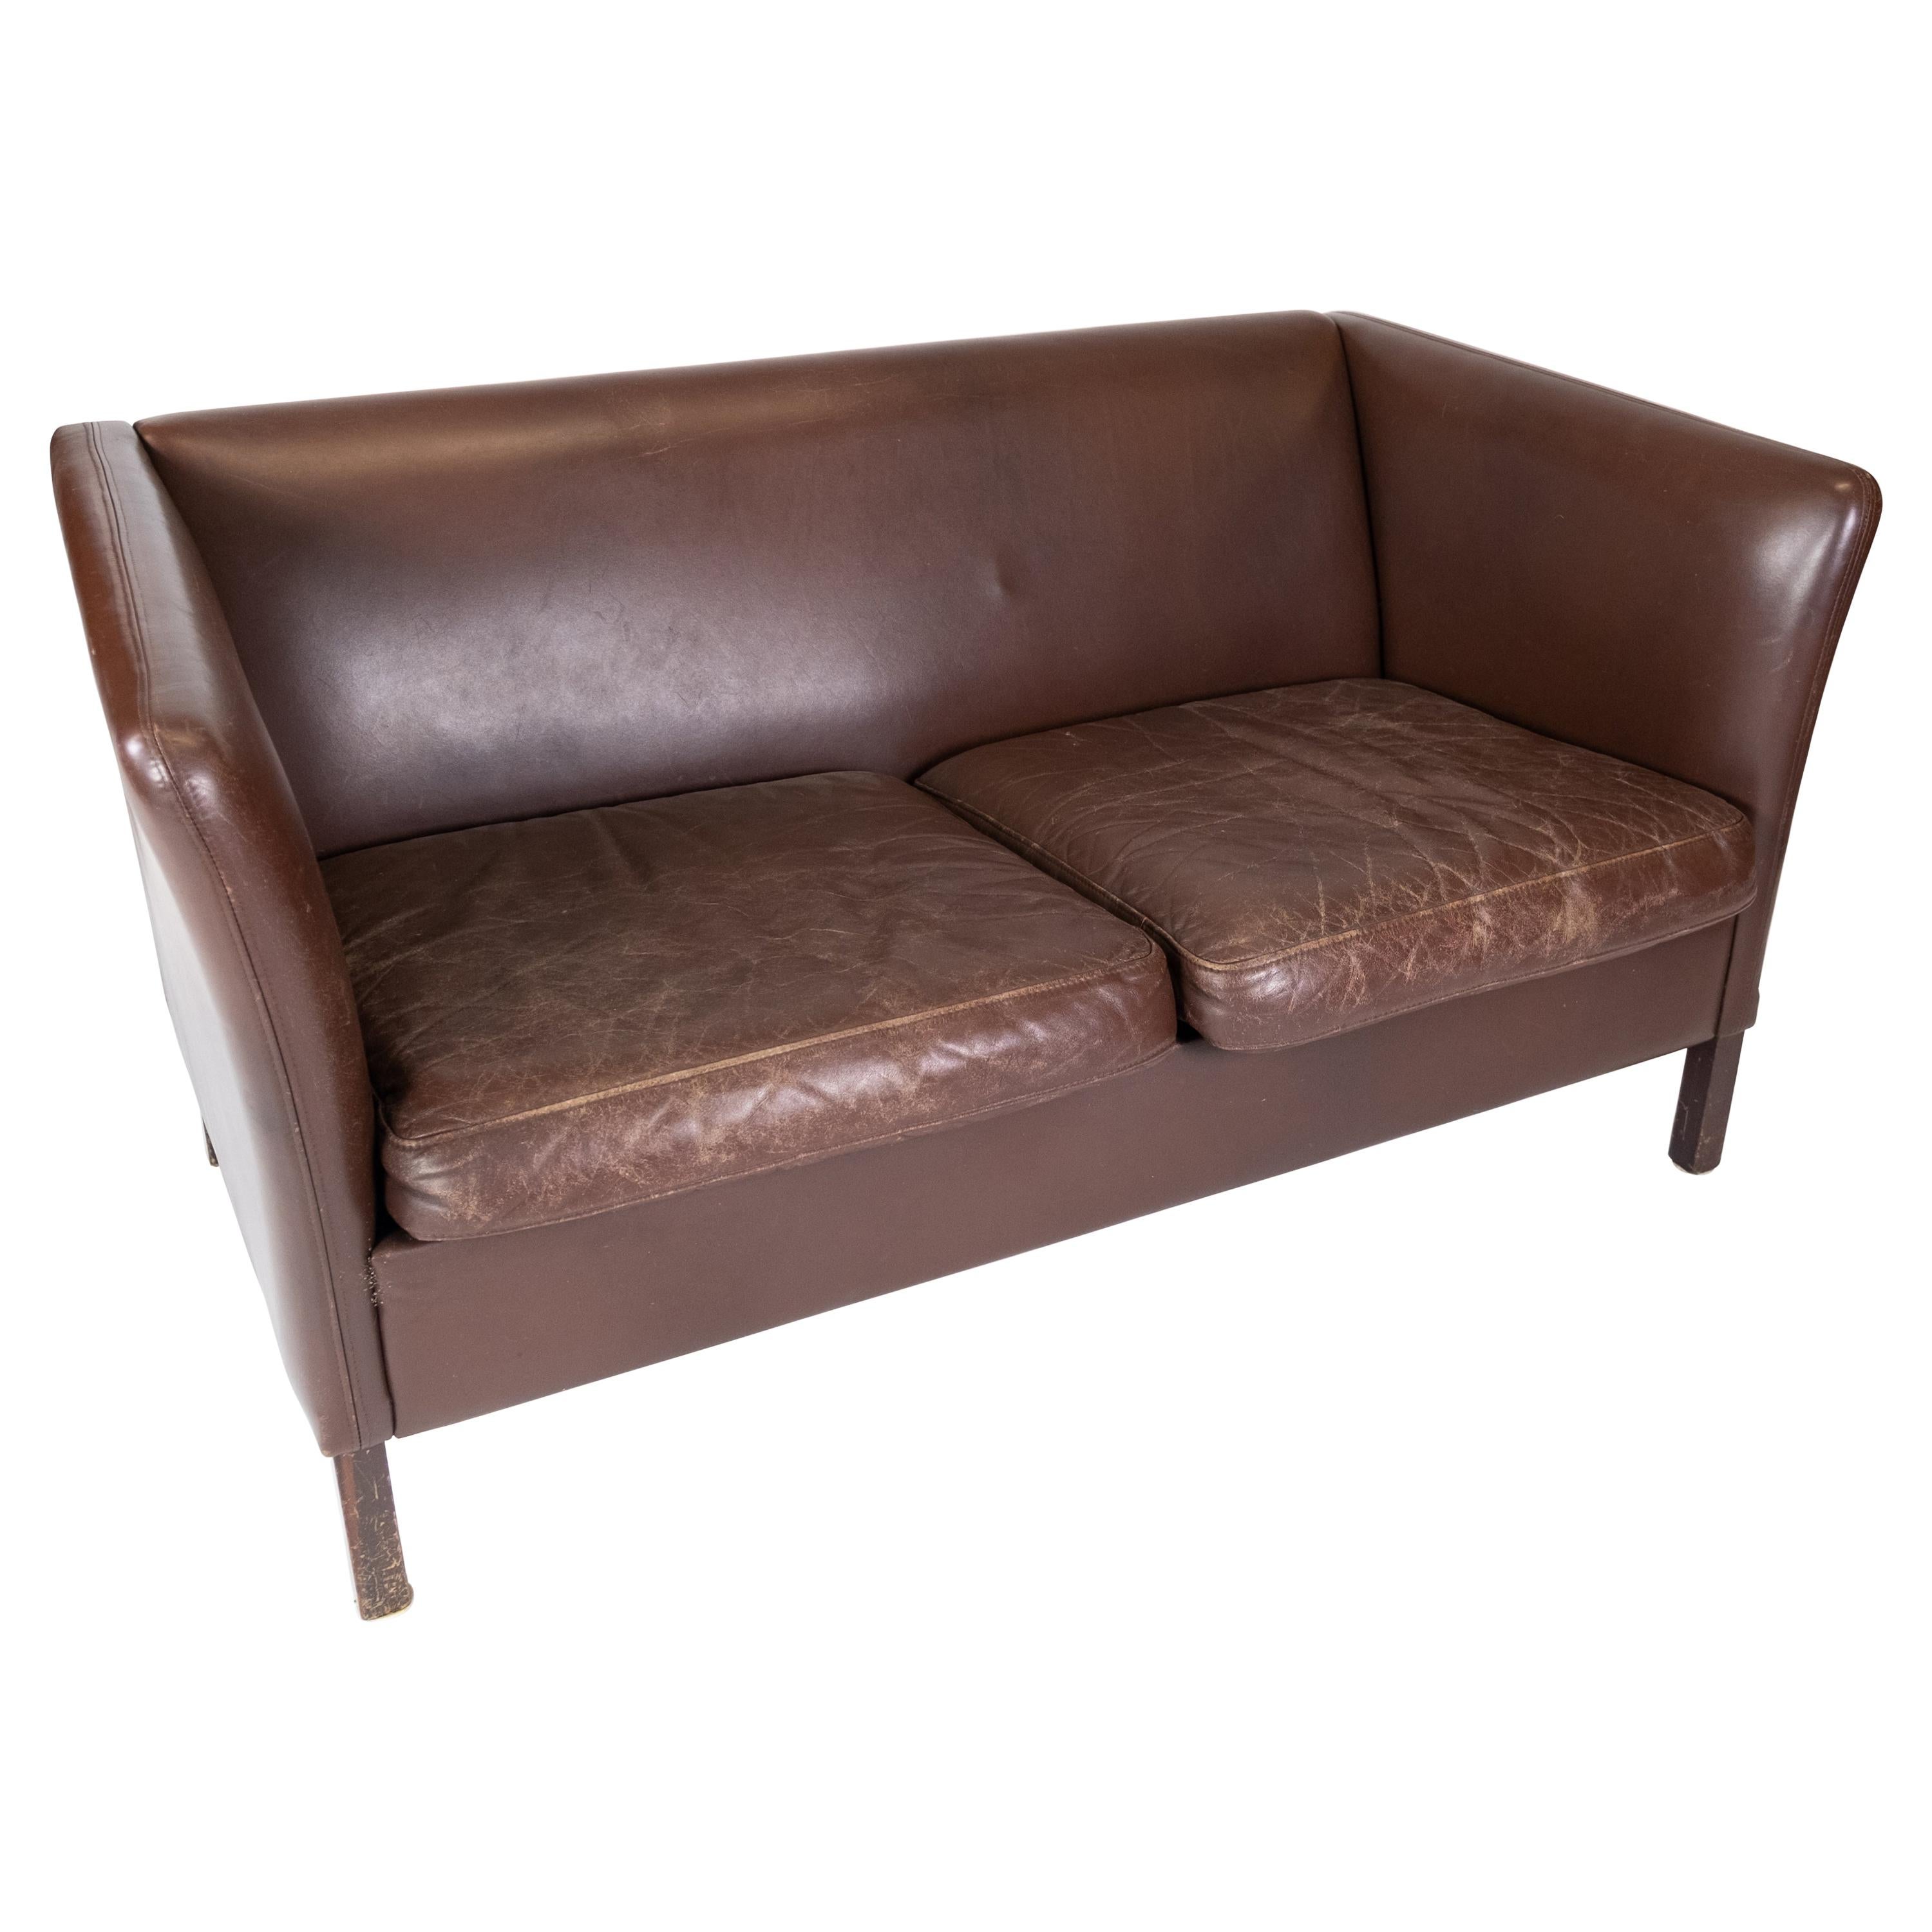 Two Seater Sofa Upholstered with Dark Brown Leather of Danish Design, 1960s